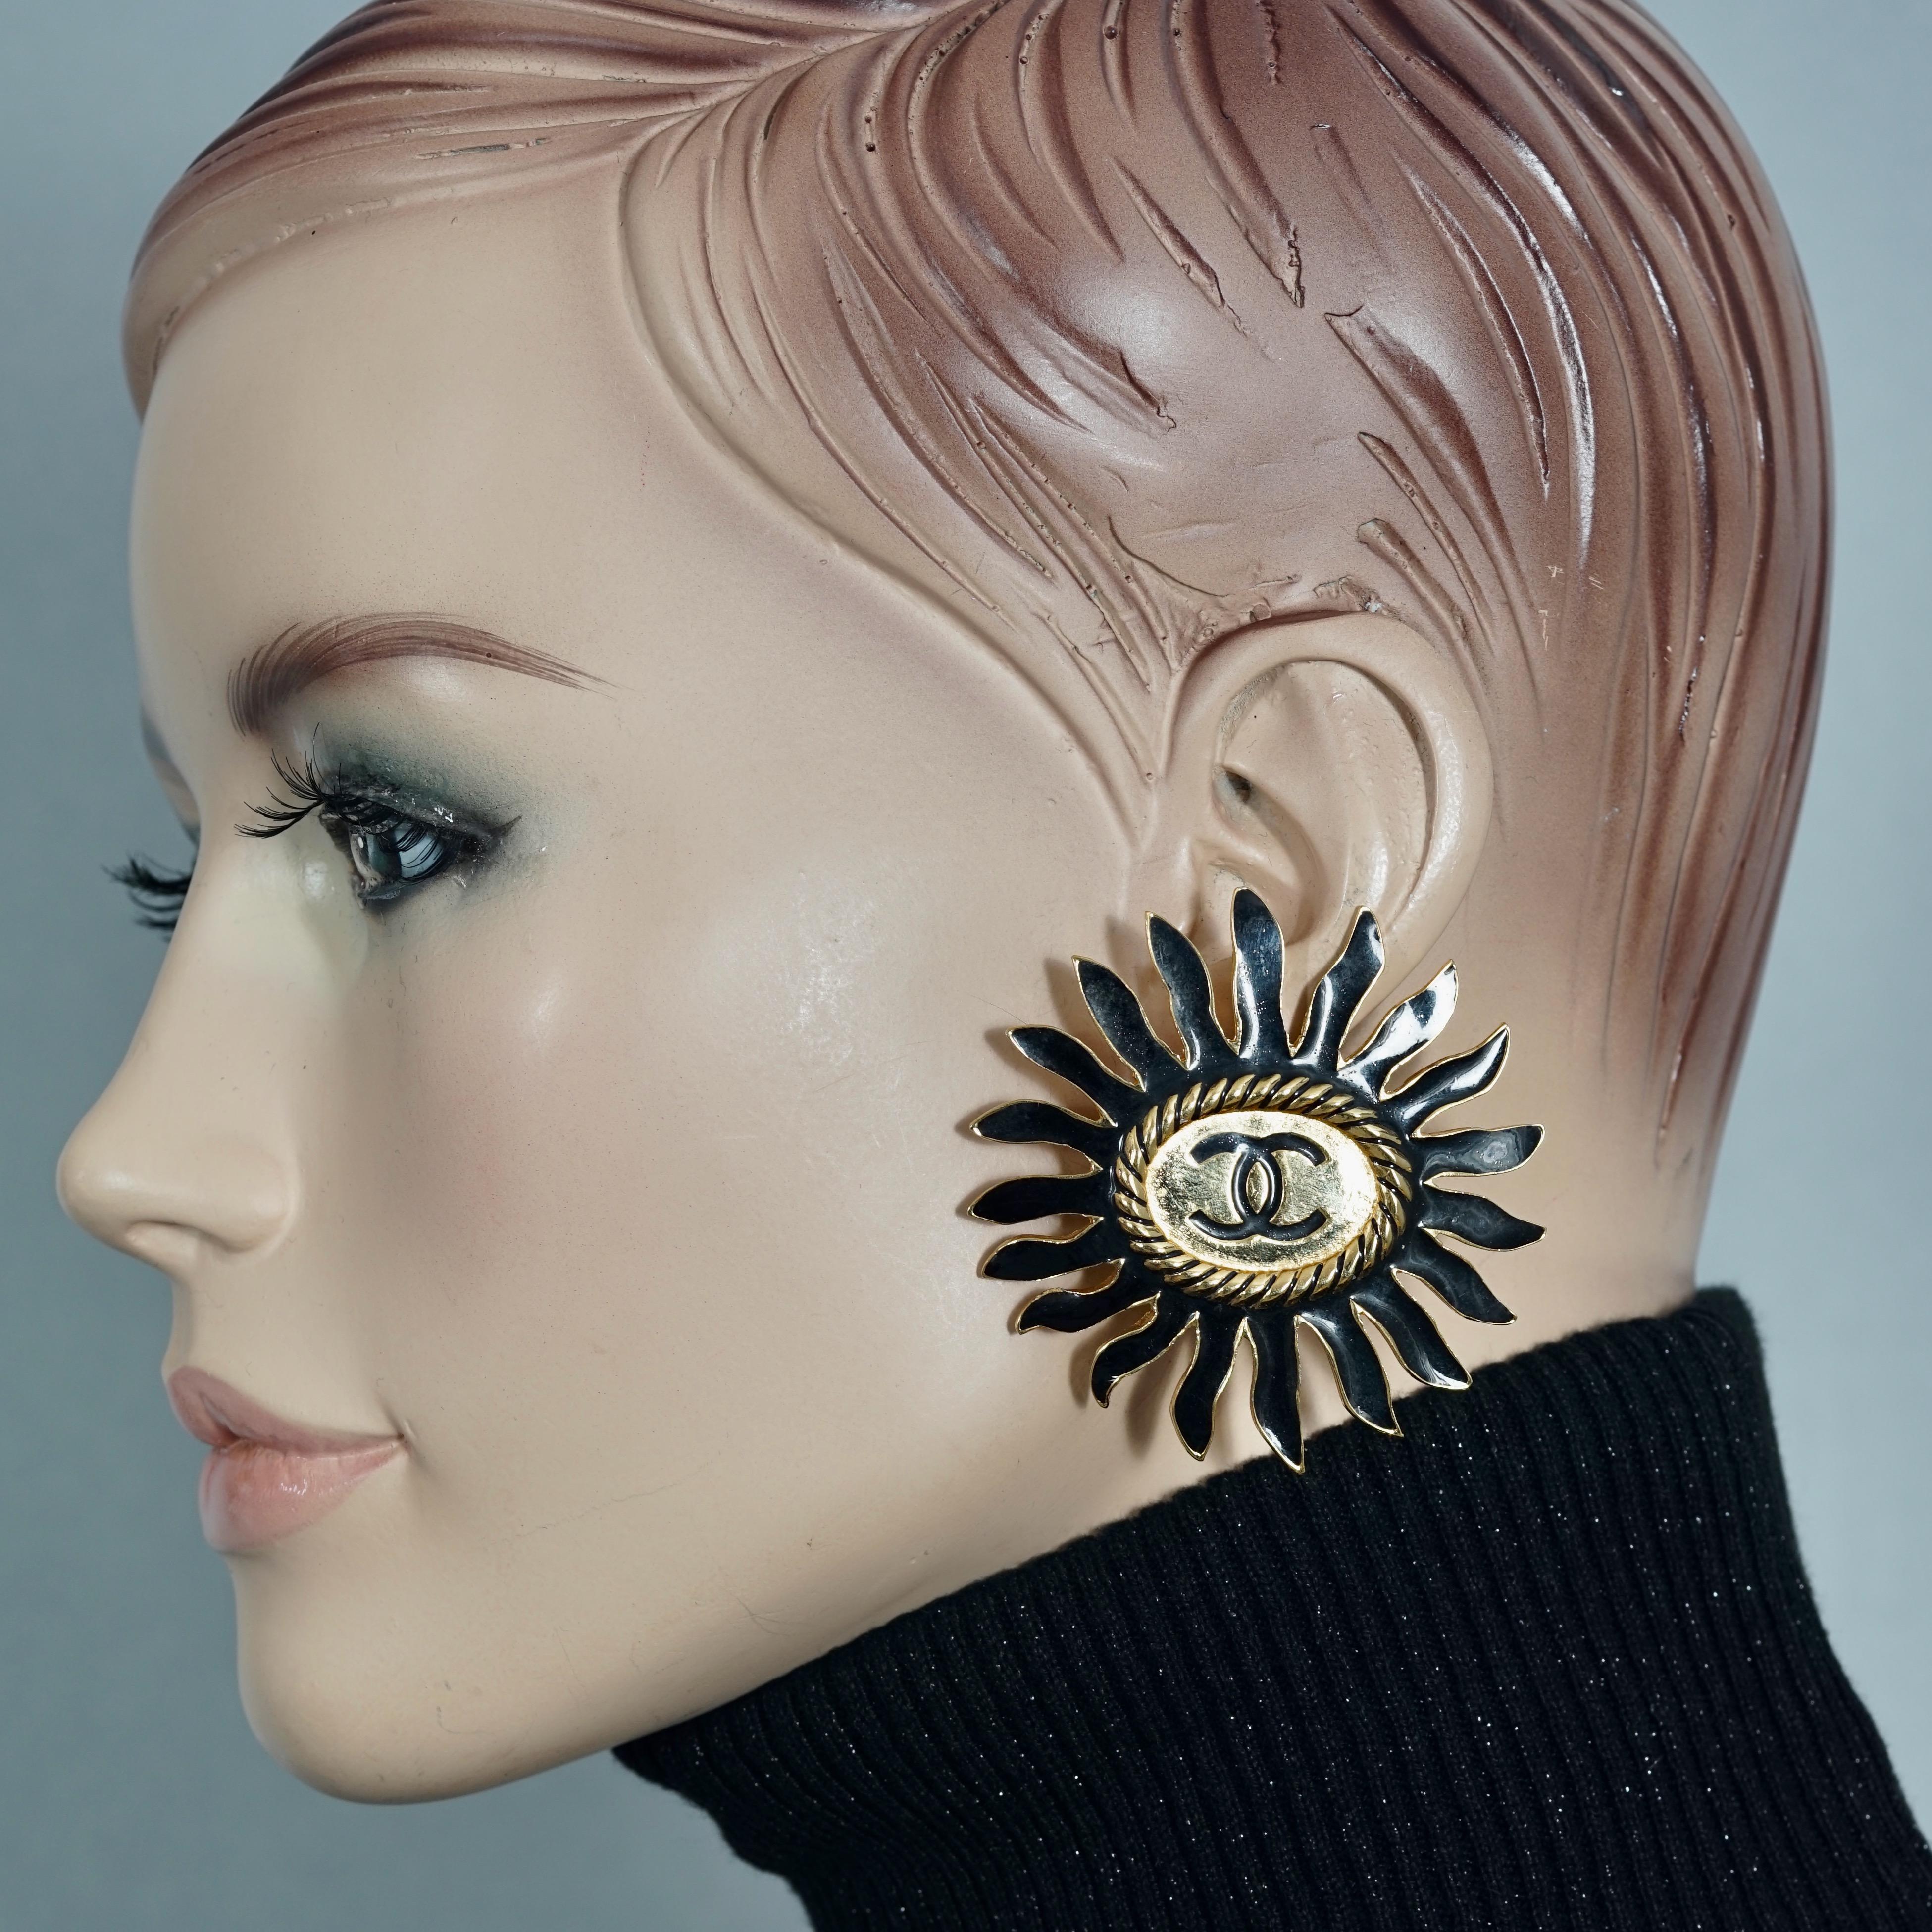 Vintage Massive CHANEL Logo Enamel Flower Earrings

Measurements:
Height: 2.30 inches (5.85 cm)
Width: 2.30 inches (5.85 cm)
Weight per Earring: 29 grams

Features:
- 100% Authentic CHANEL.
- Massive flower with black enamel and CC logo at the